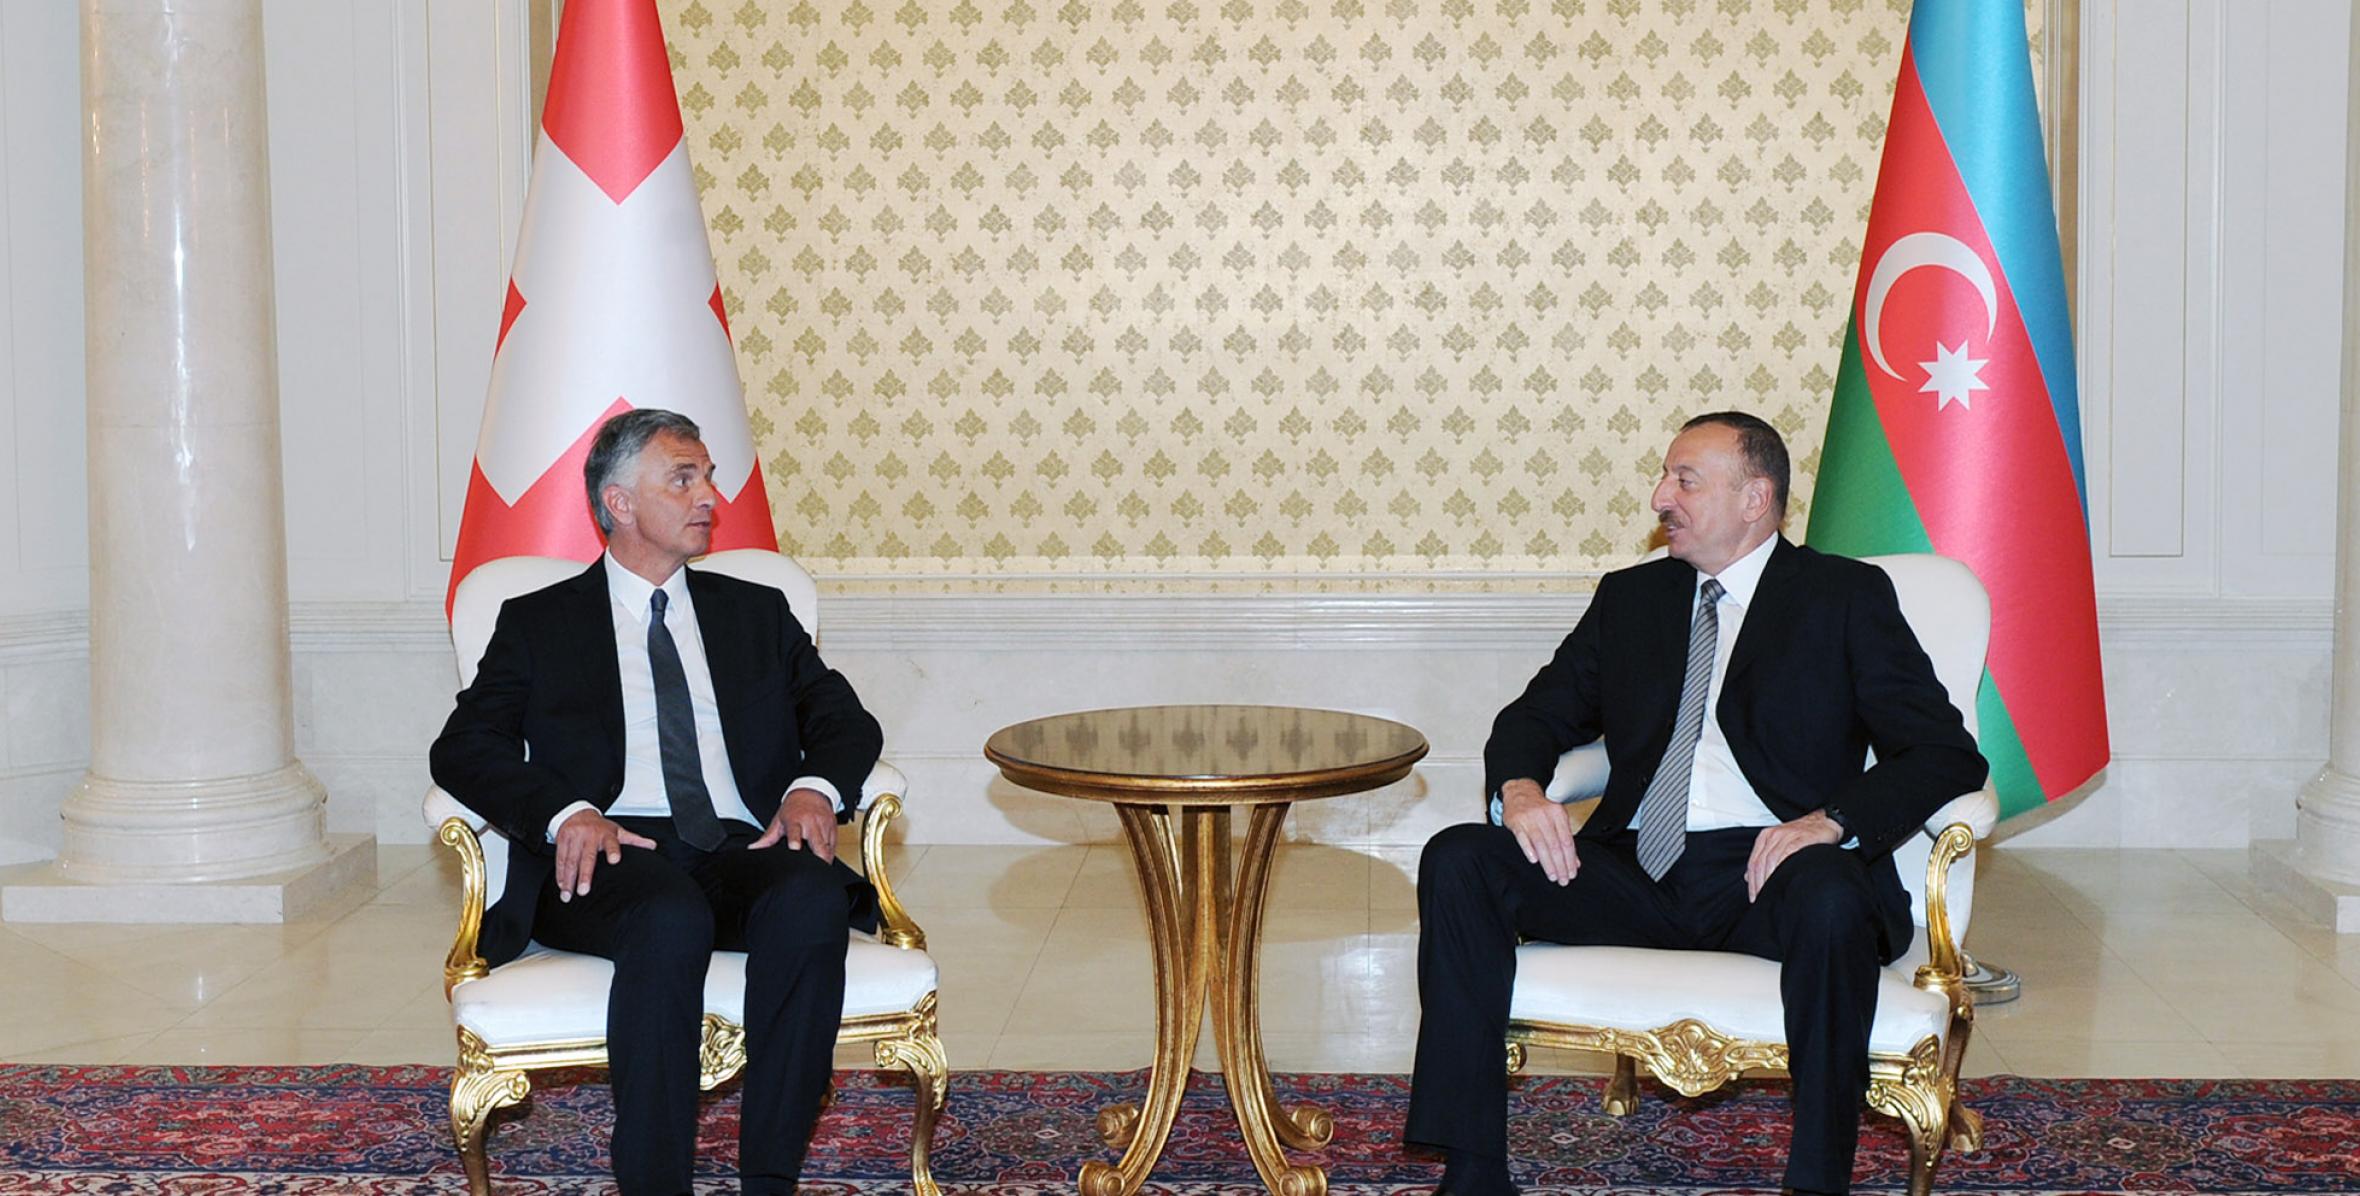 Ilham Aliyev held a one-on-one meeting with President of the Swiss Confederation Didier Burkhalter